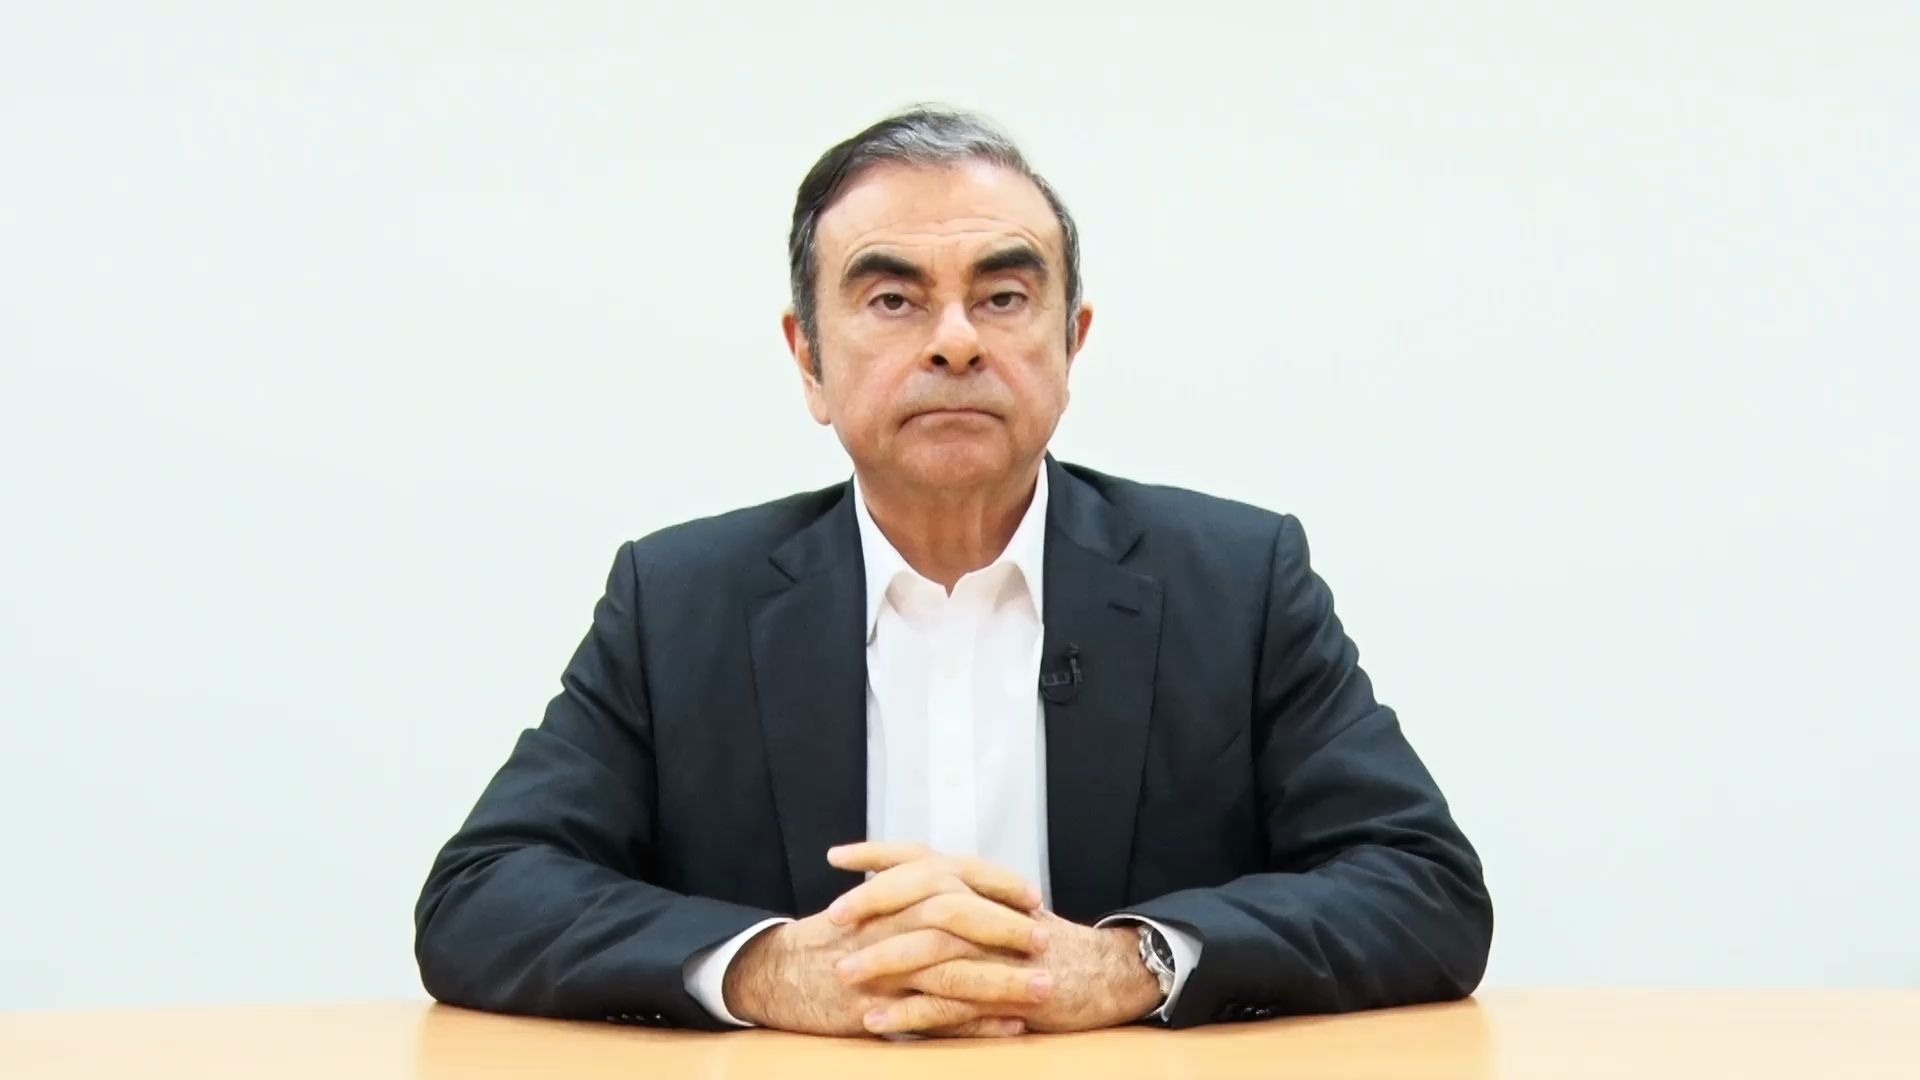 Carlos Ghosn sitting at a table with his hands crossed.